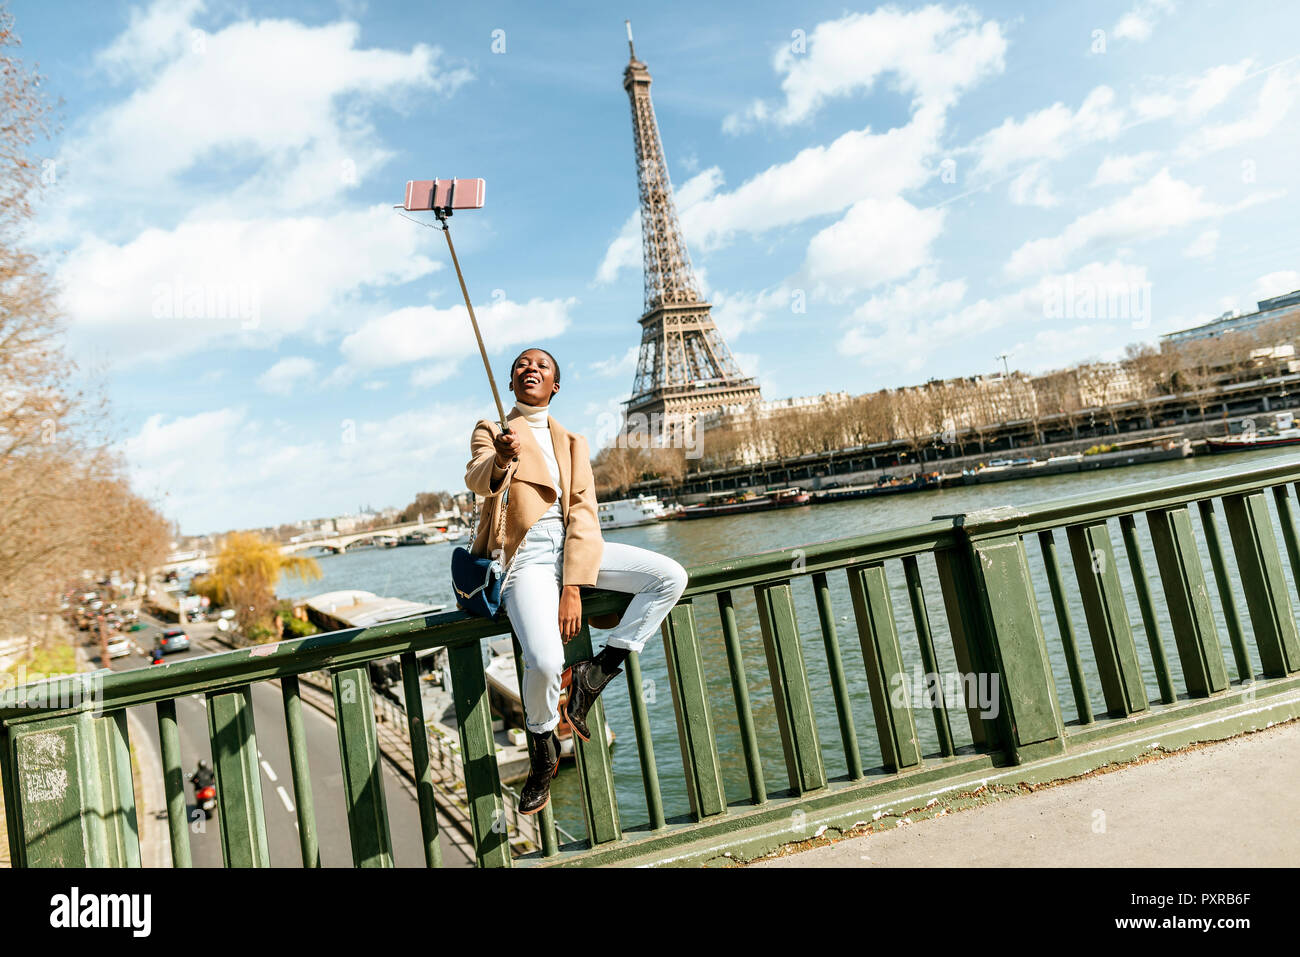 France, Paris, Woman sitting on bridge over the river Seine with the Eiffel tower in the background taking a selfie Stock Photo